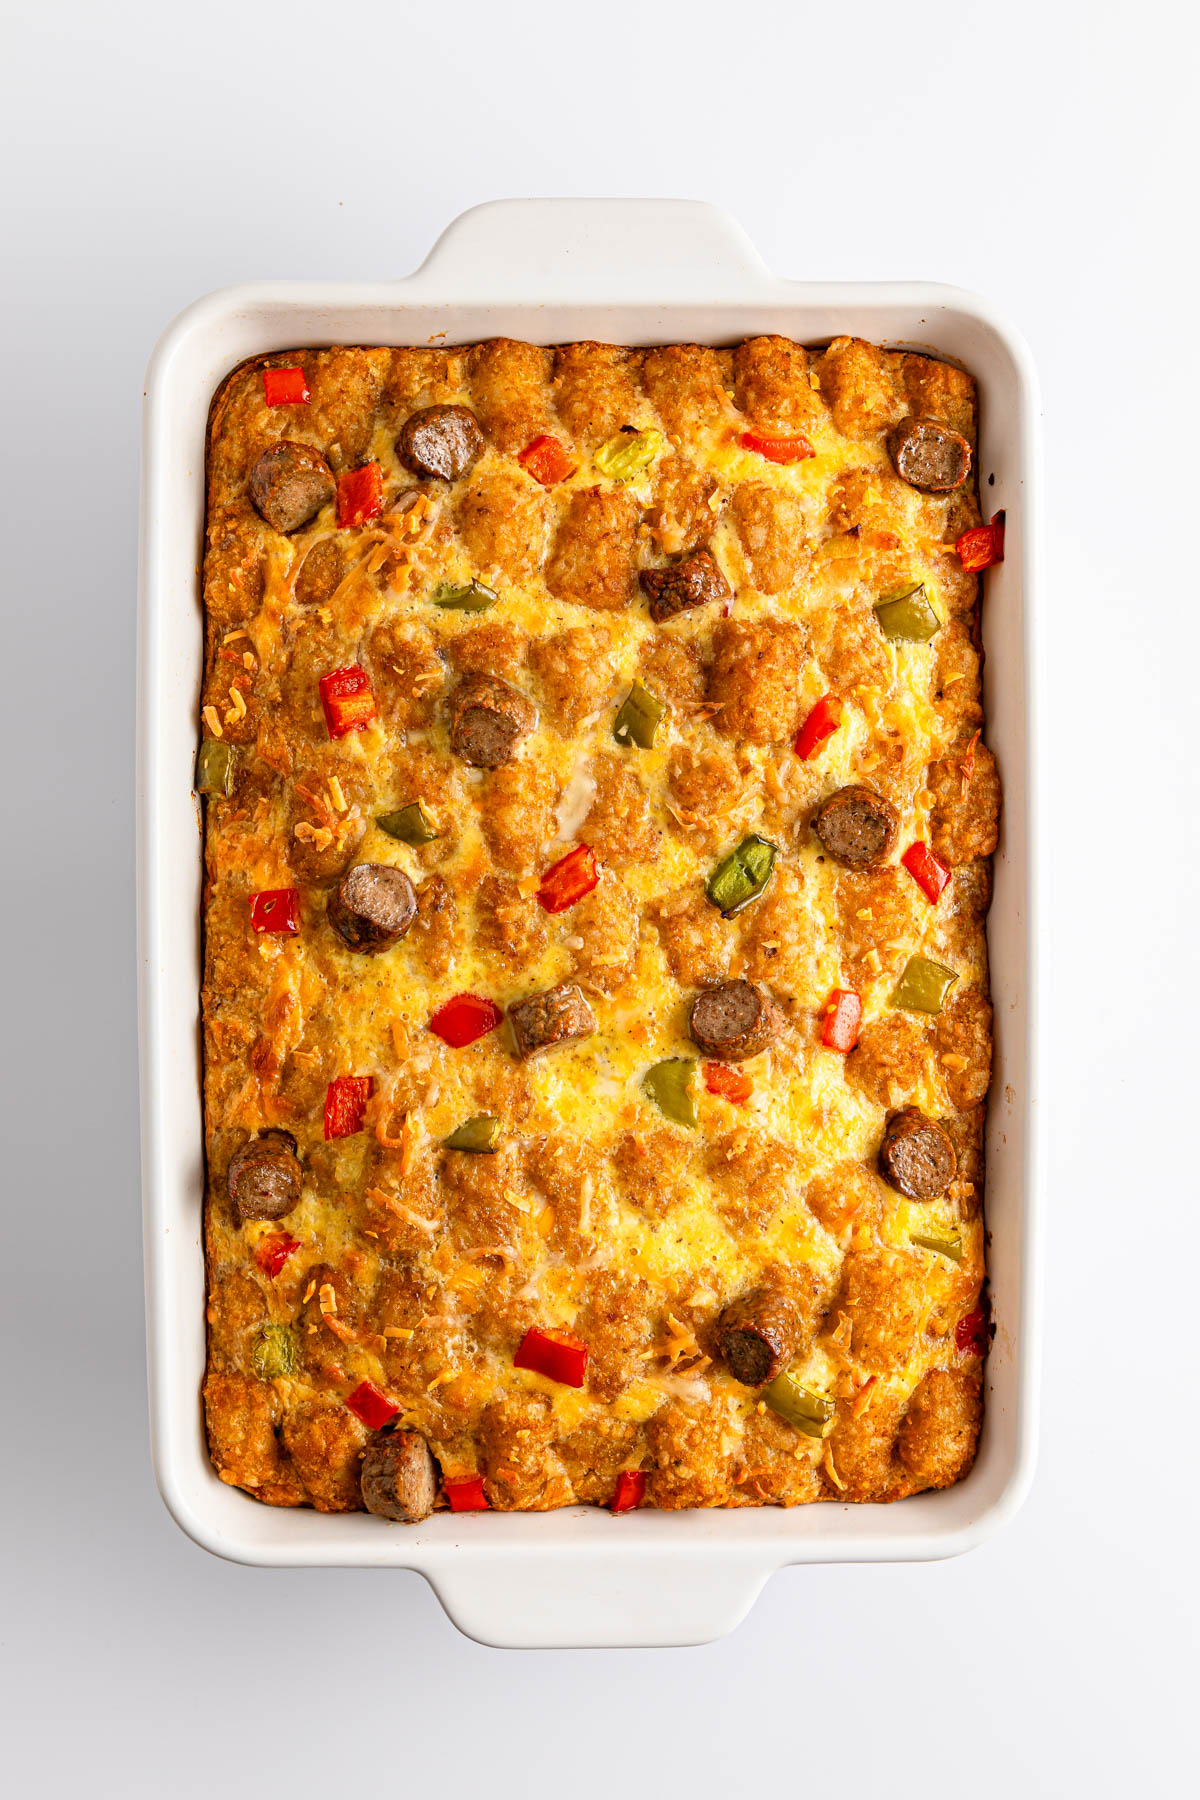 Baked casserole with sausage and vegetables in a white dish.